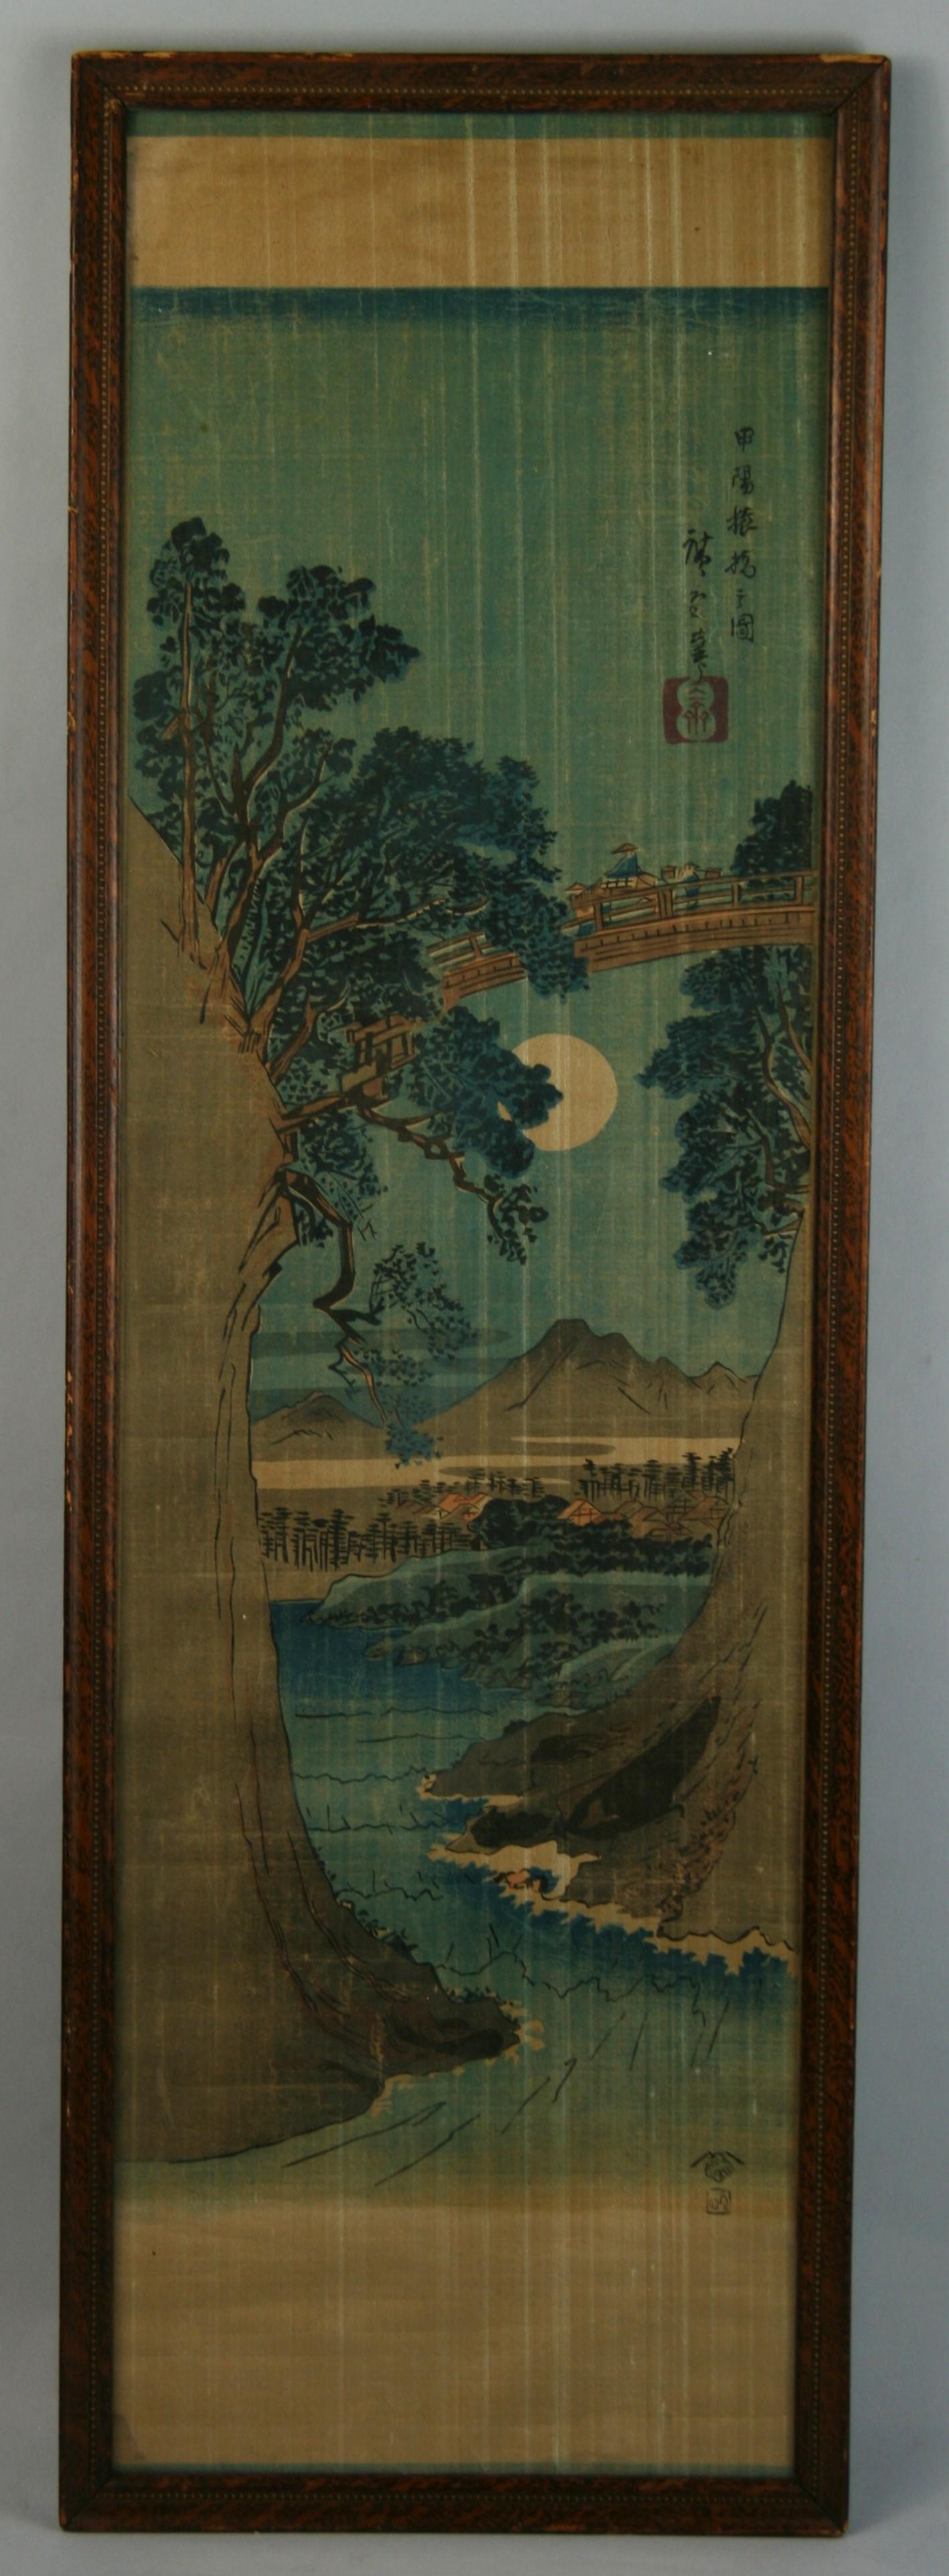 Unknown Landscape Art - Antique Chinese landscape ink painting on silk in Blue